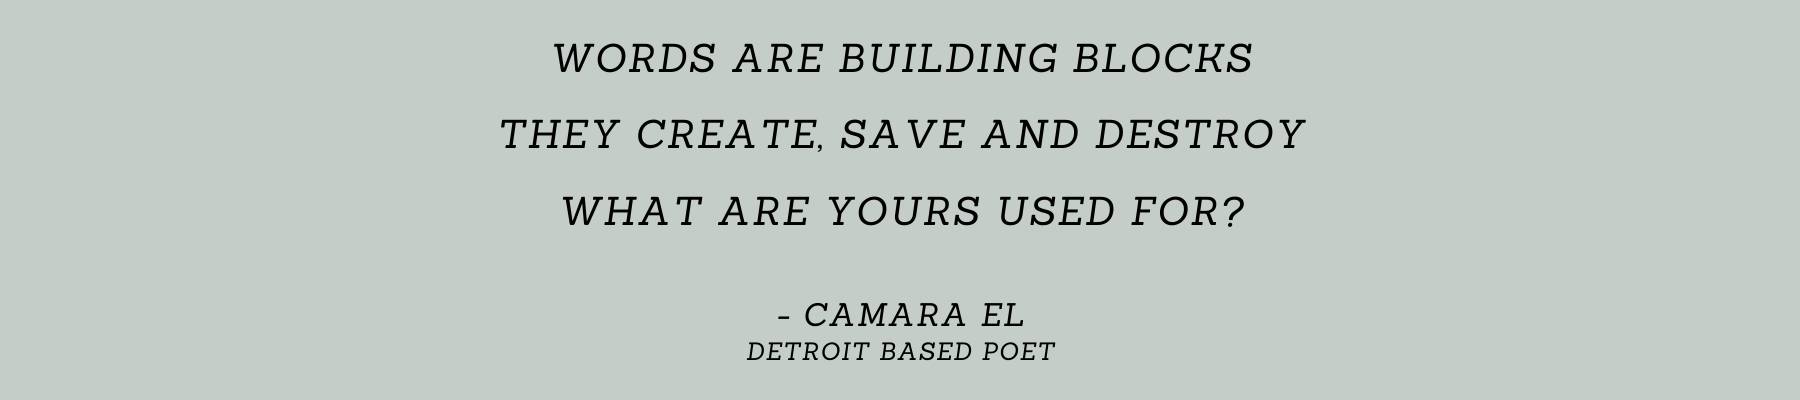 Words are building blocks / They create, save and destroy / What are yours used for? -Camara El, Detroit based poet